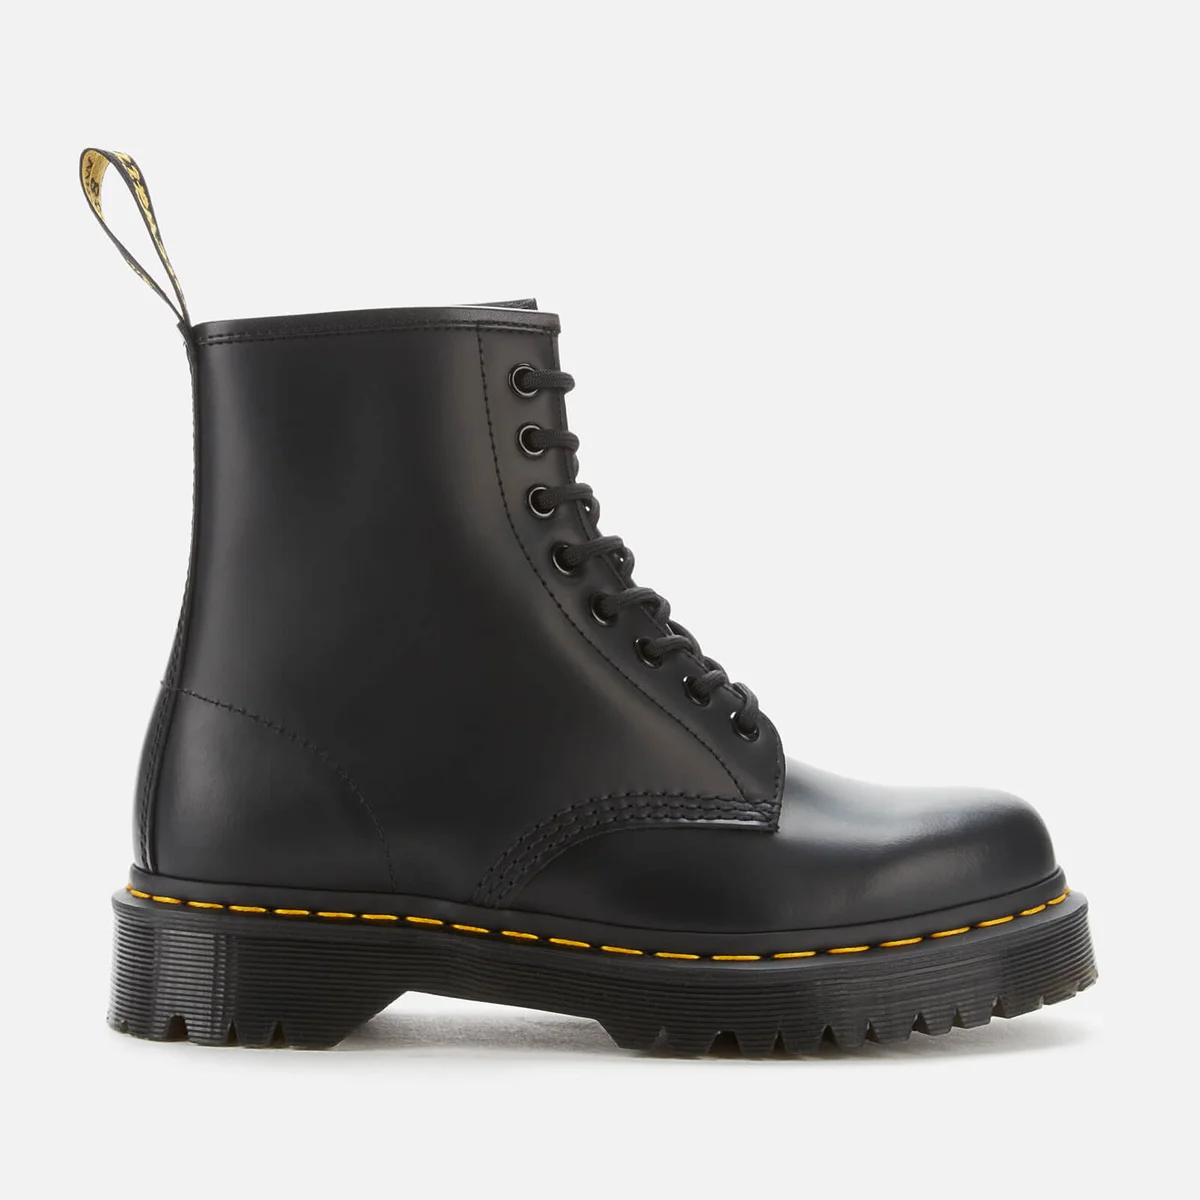 Dr. Martens 1460 Bex Smooth Leather 8-Eye Boots - Black Image 1